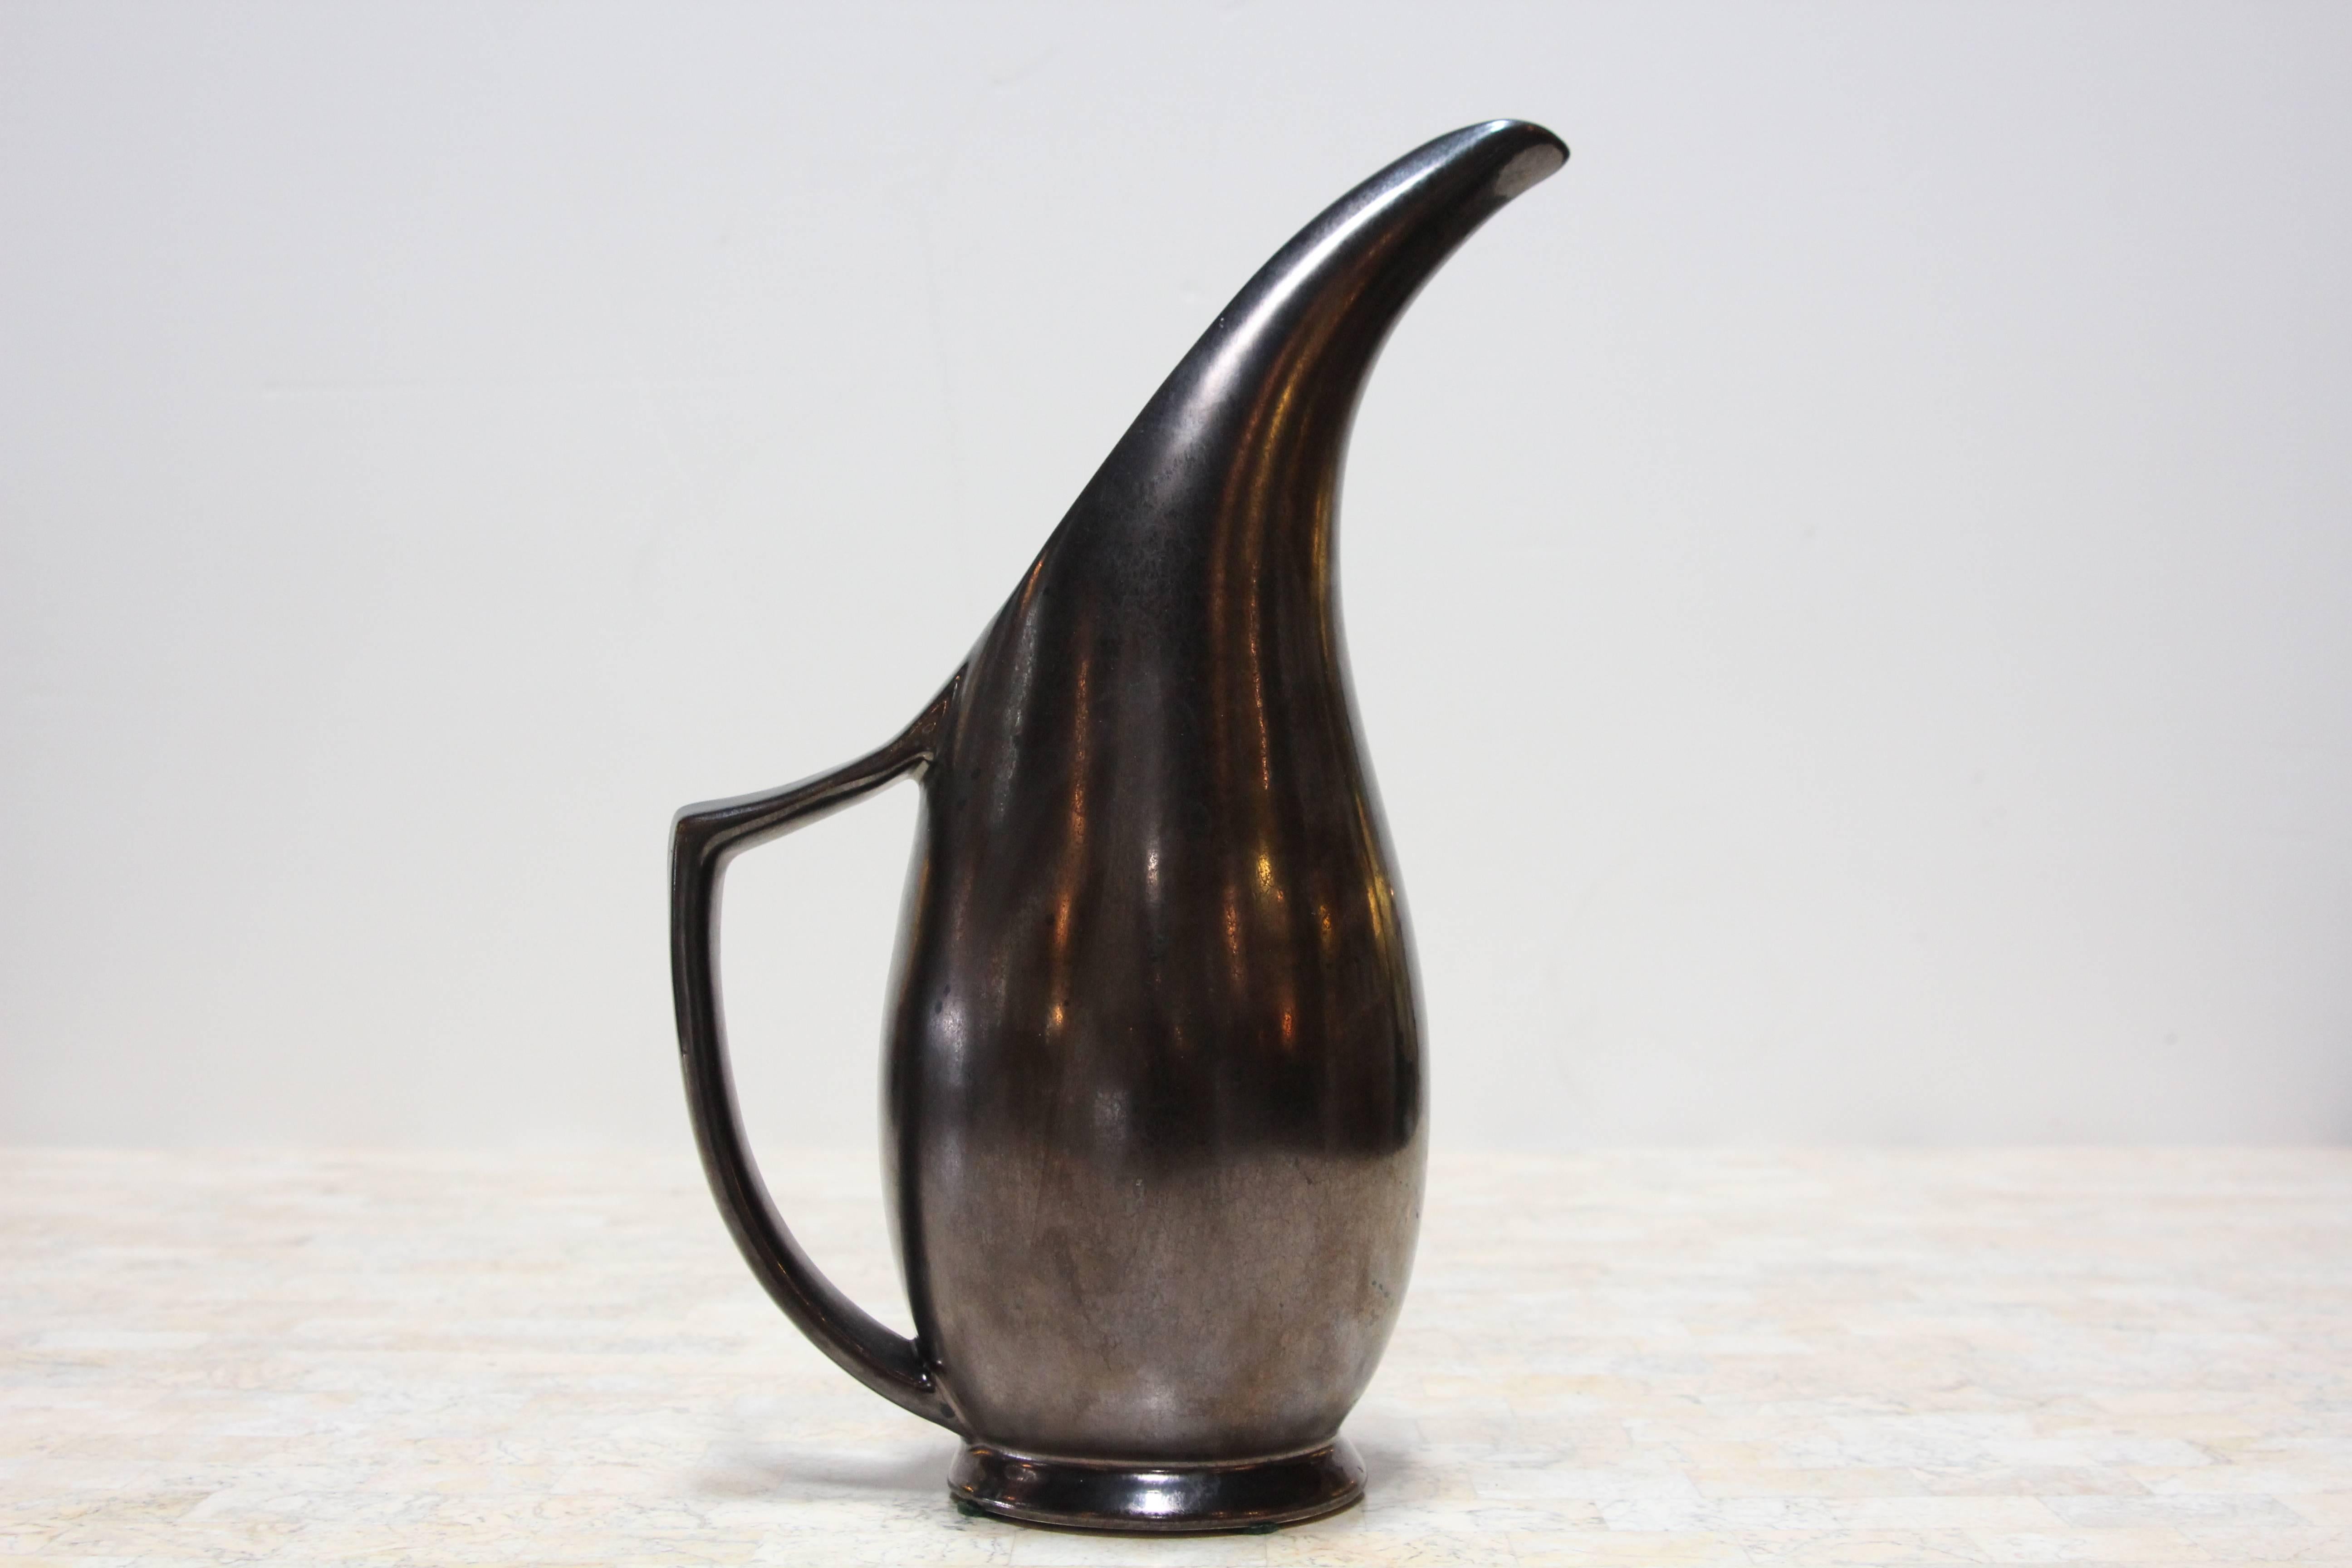 An iridescent black ceramic tall pitcher with a long pouring spout.
The ceramic features golden reflects.